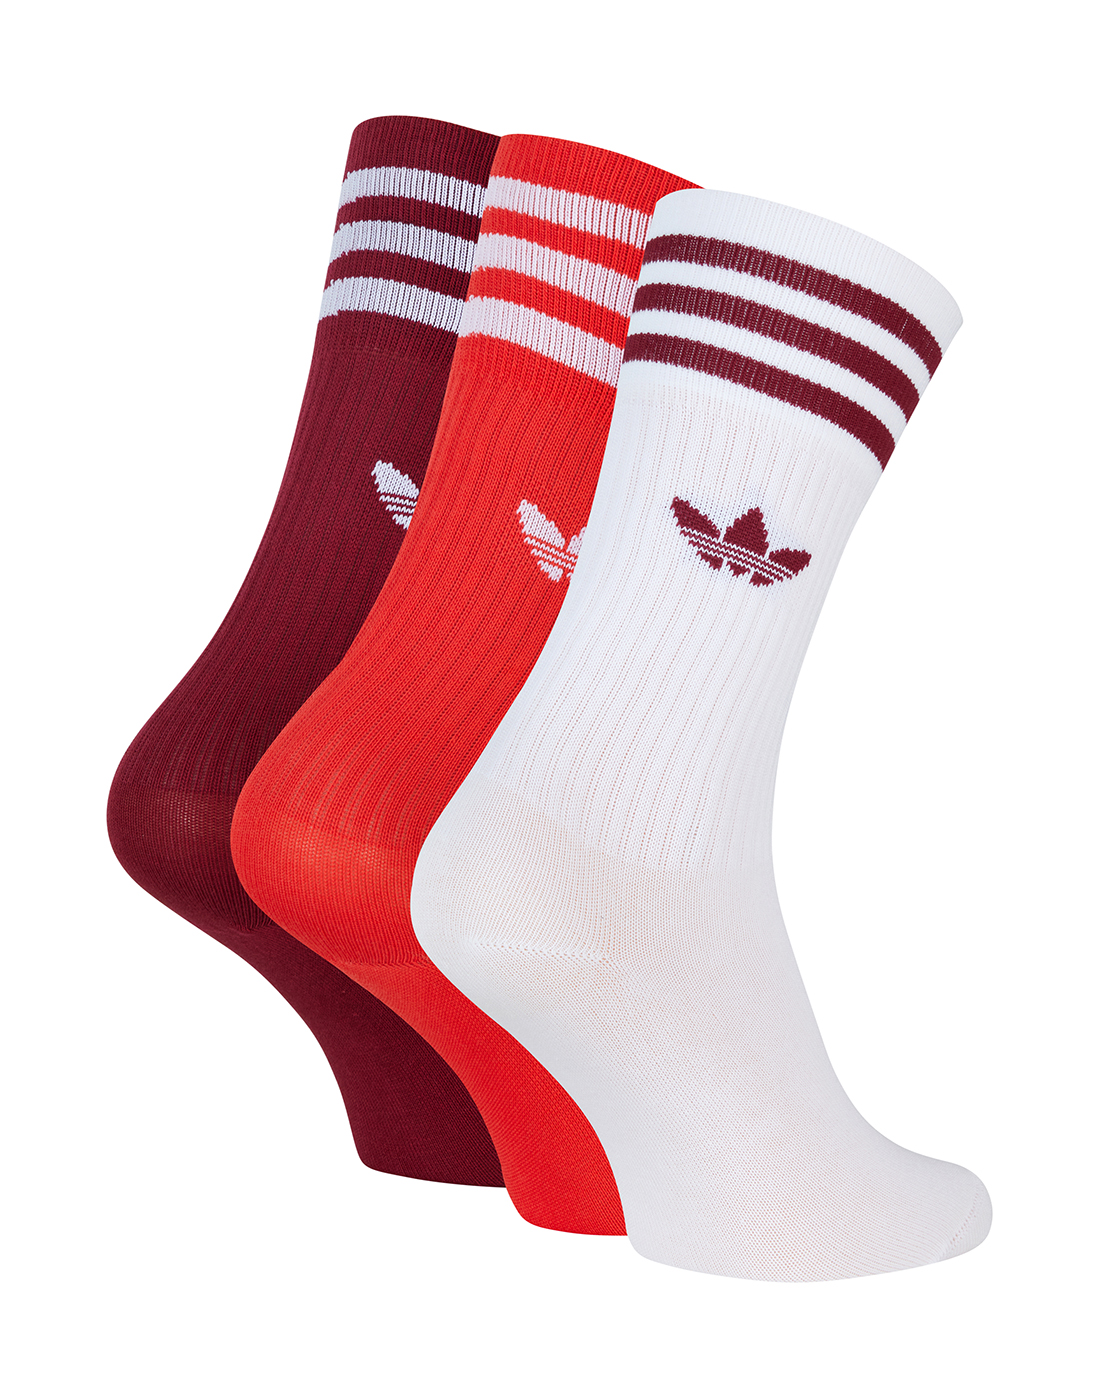 adidas Originals Solid 3 Pack Crew Socks - Red | Life Style Sports IE